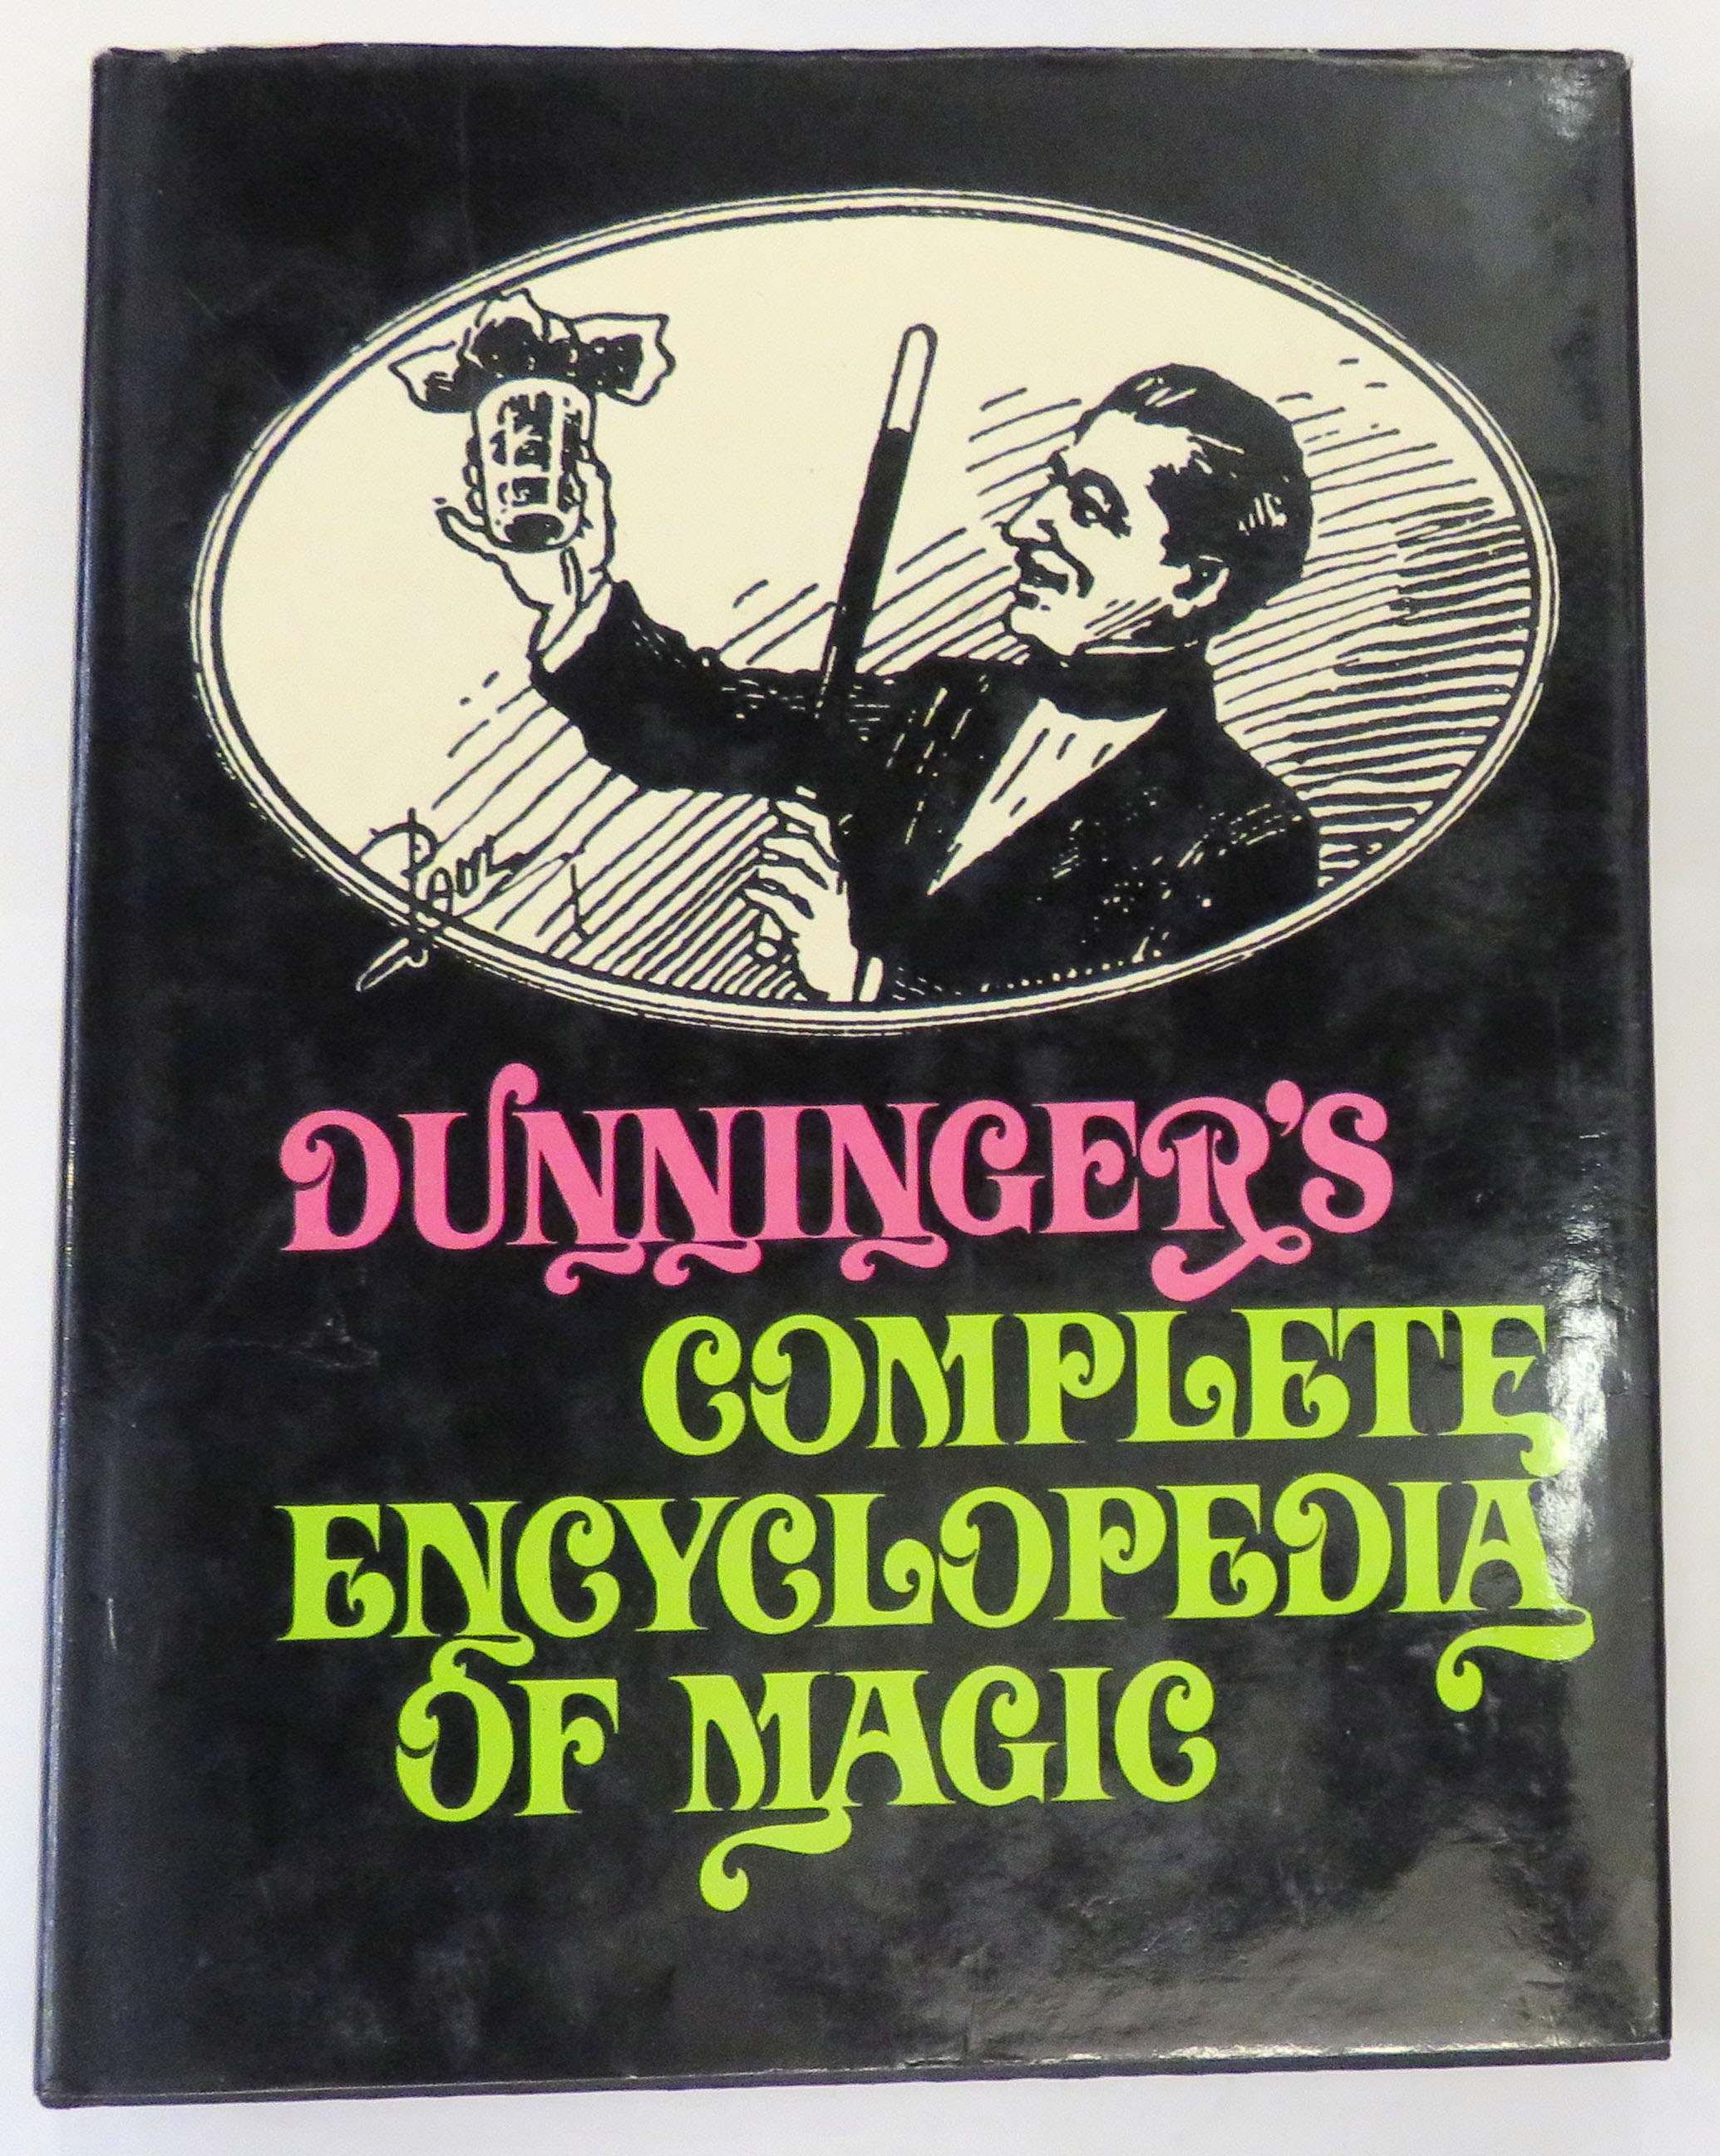 Dunninger's Complete Encyclopedia Of Magic 